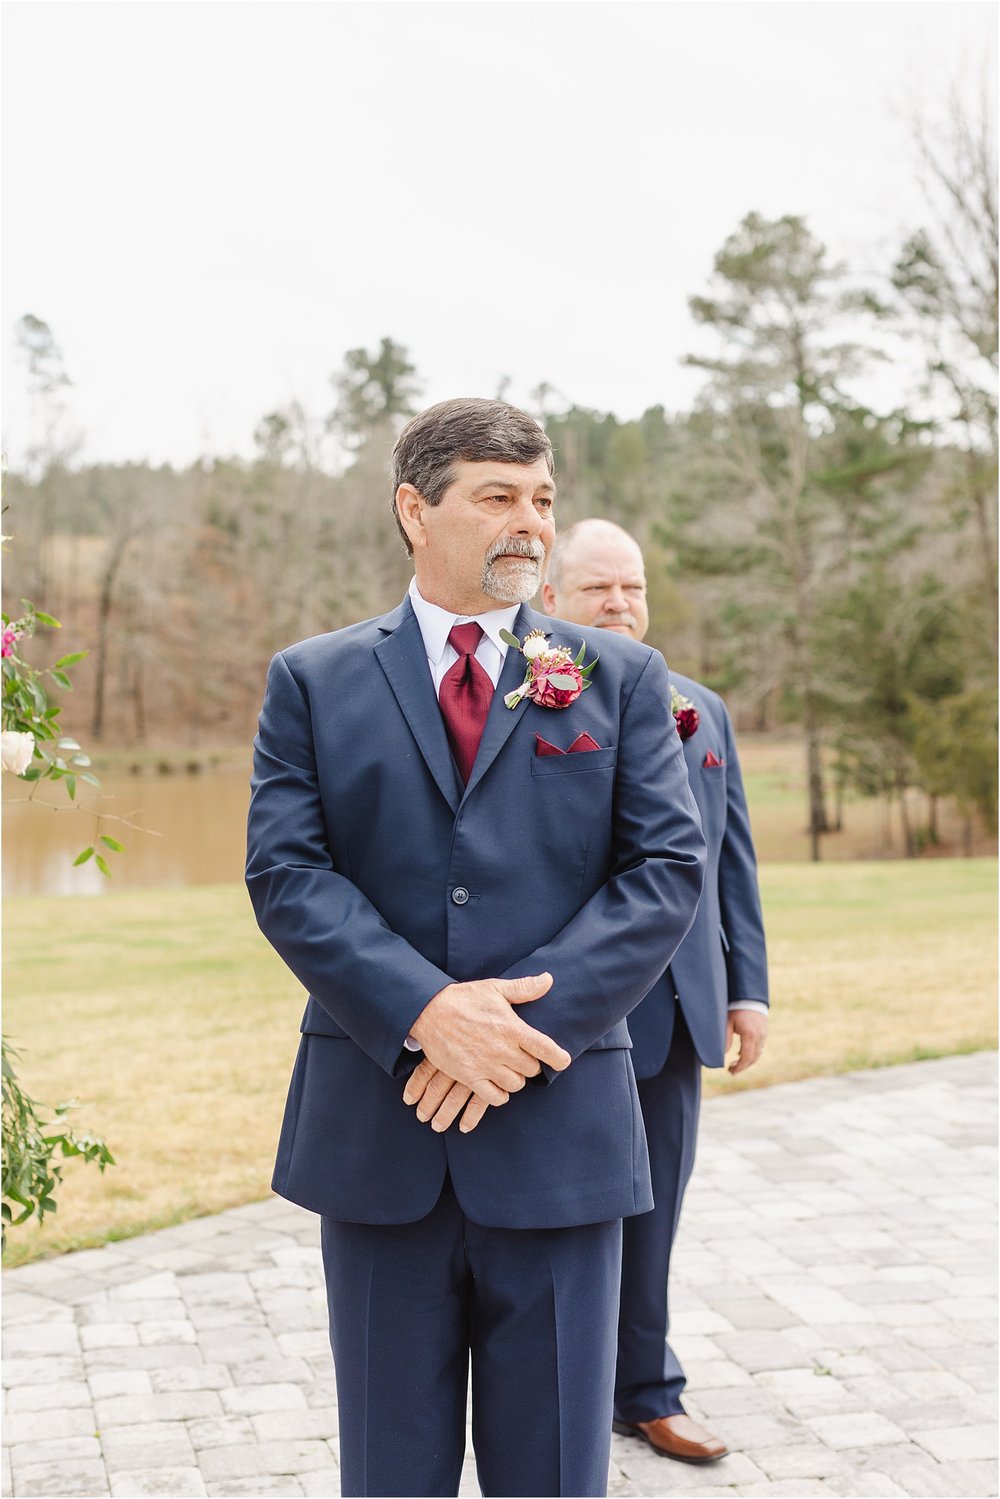 Groom Watches His Bride Walk Down the Aisle